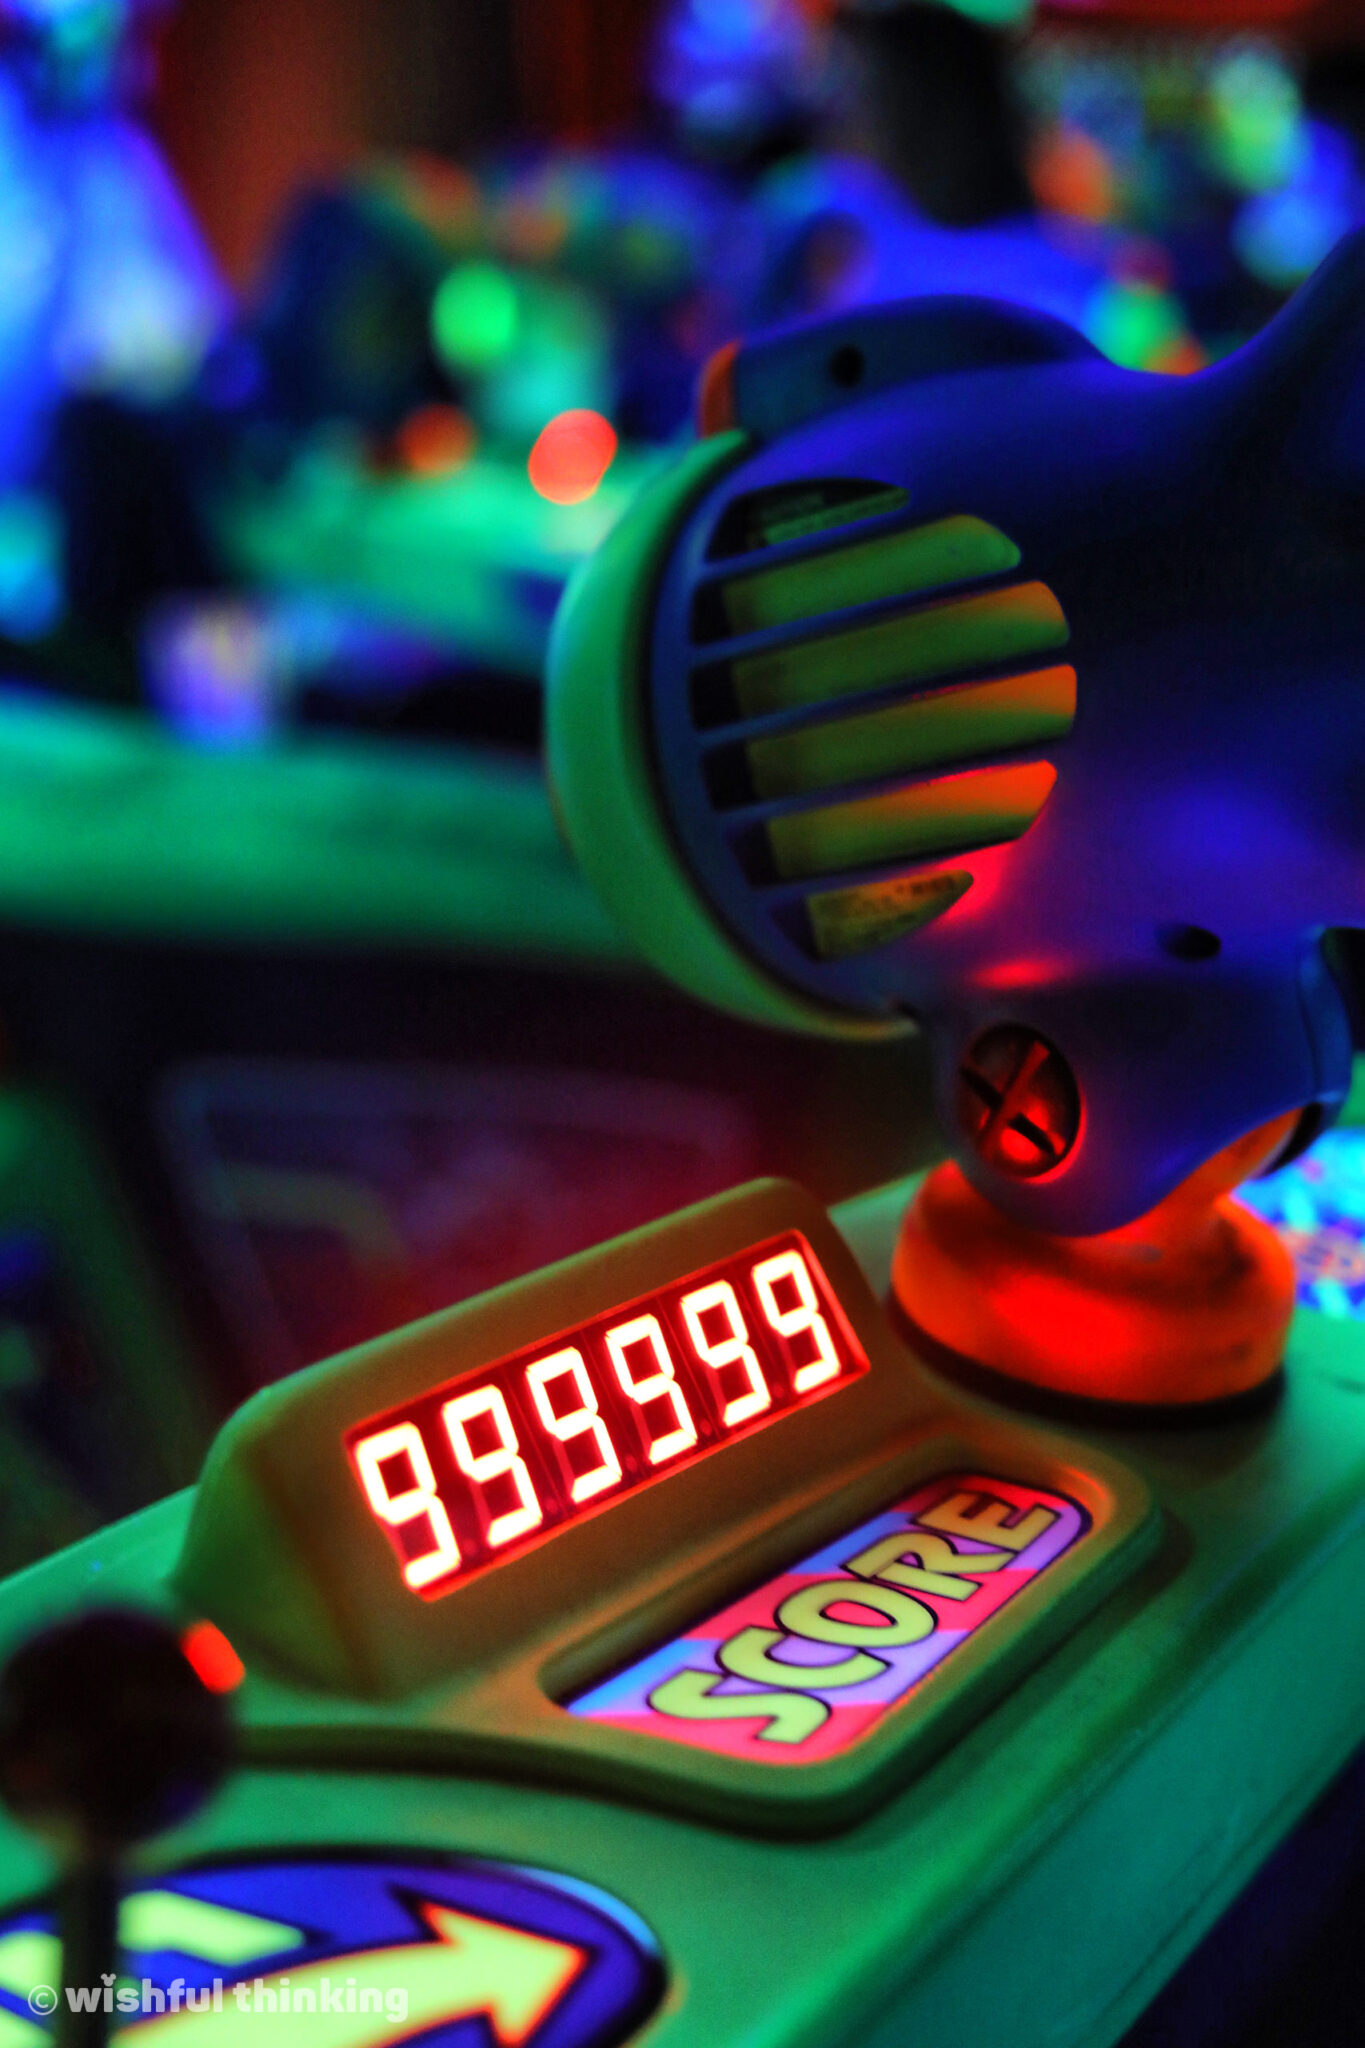 The ultimate high score on Buzz Lightyear's Space Ranger Spin, earning the Galactic Hero classification in Disney's Magic Kingdom